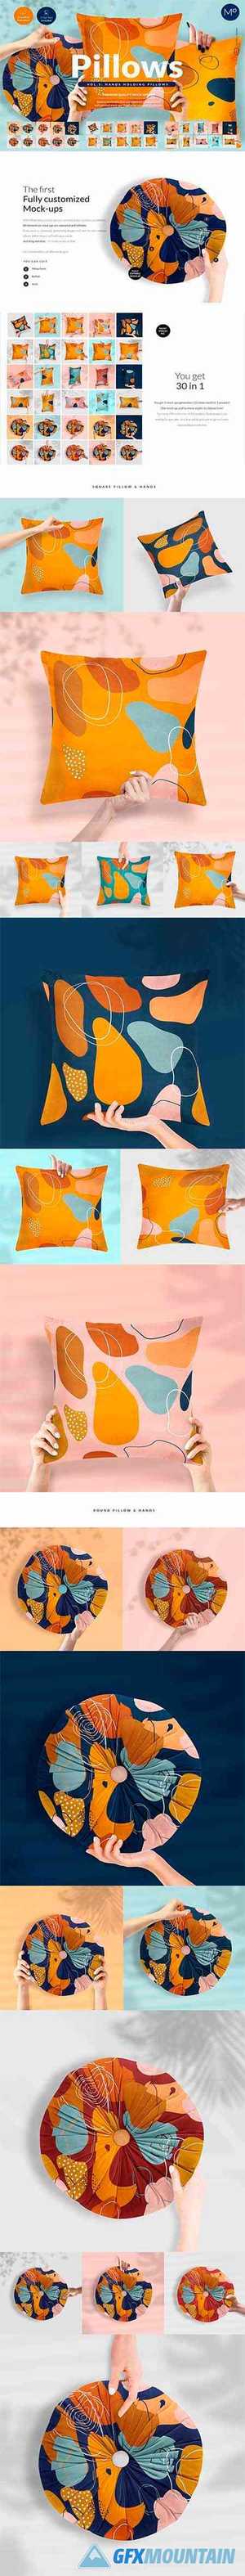 Pillows vol.3: with Hands Mock-ups 5312420